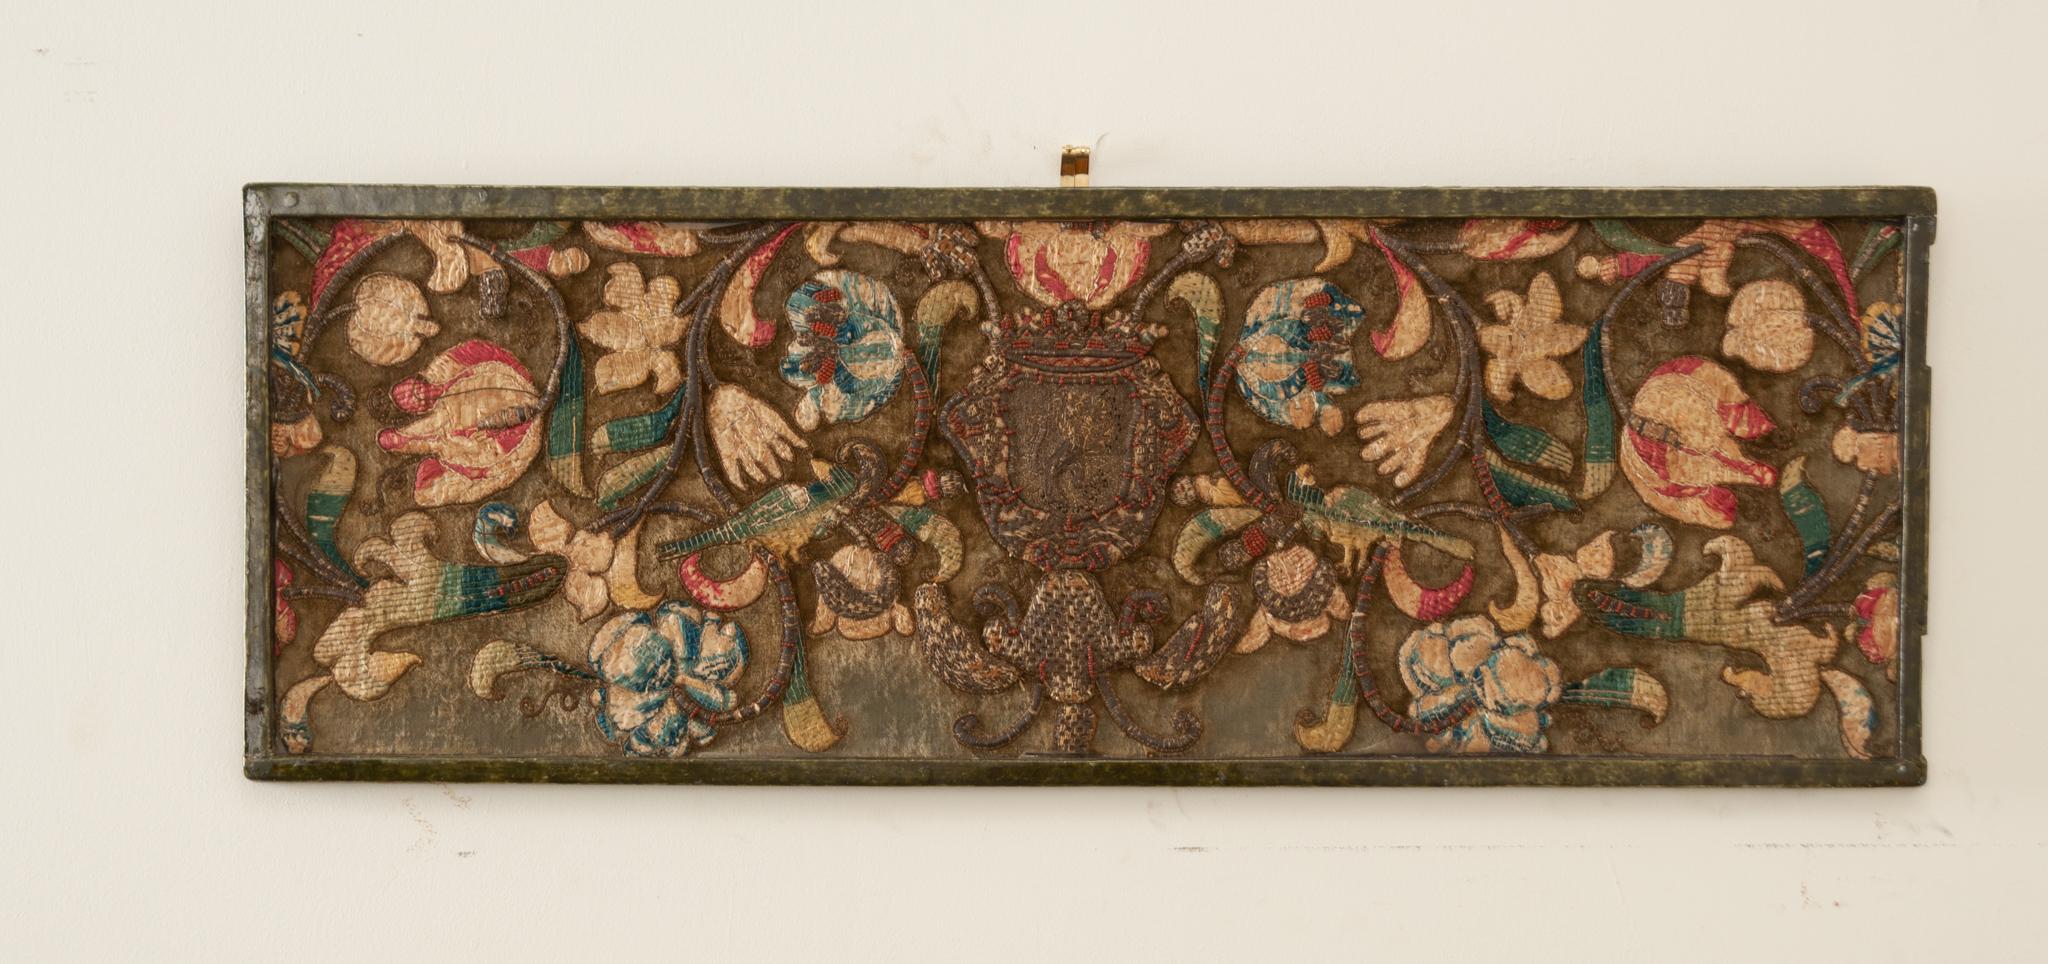 An elongated and framed French antique tapestry fragment from the 18th century depicting Baroque flowers and birds made from a number of fibers including silk and gold threads. Hand-woven by a workshop in the 1700s, this amazing tapestry fragment